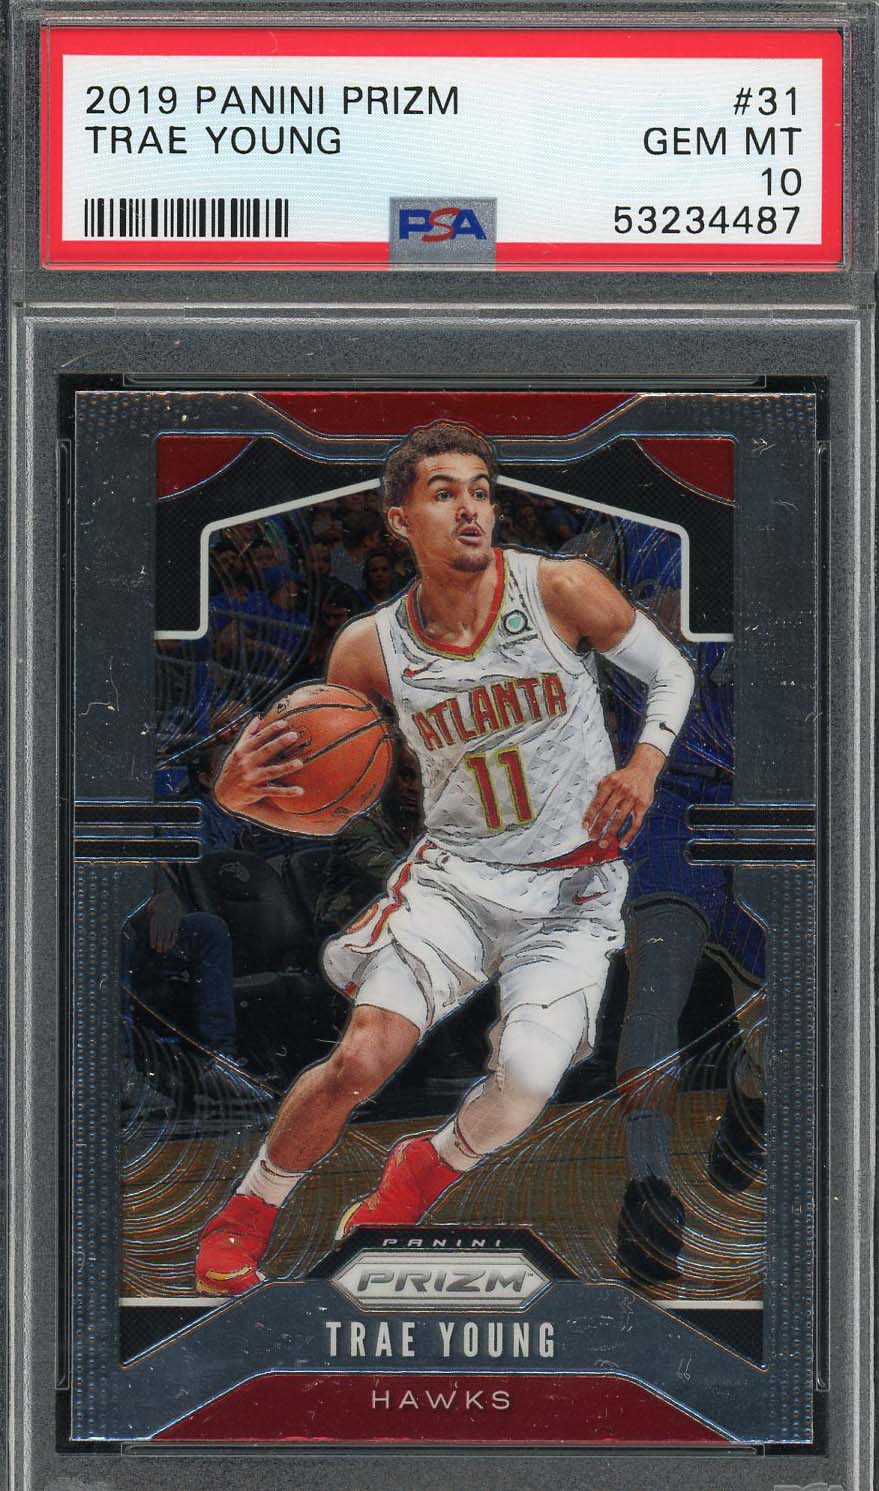 Trae Young - Sports Memorabilia & Autographed Sports Collectibles